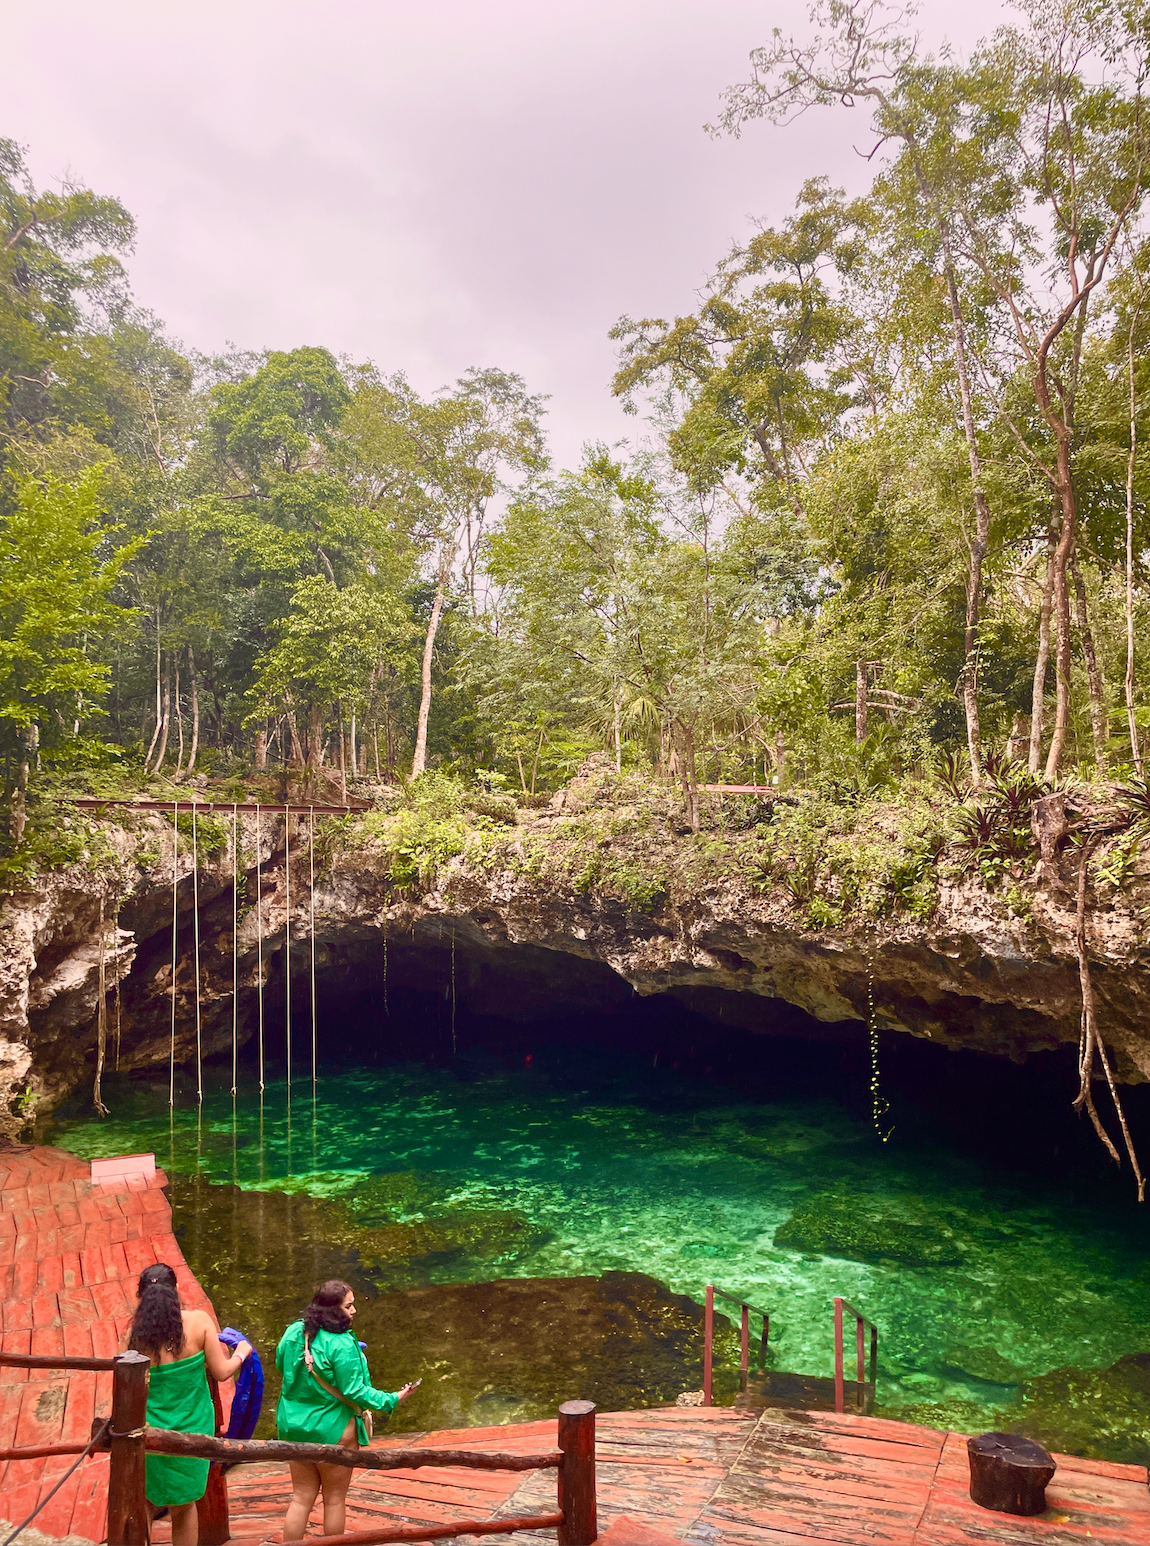 At the Cenote Mariposa in Tulum, you can take a tour guide to hike and swim. There are also spiritual activities afterward.